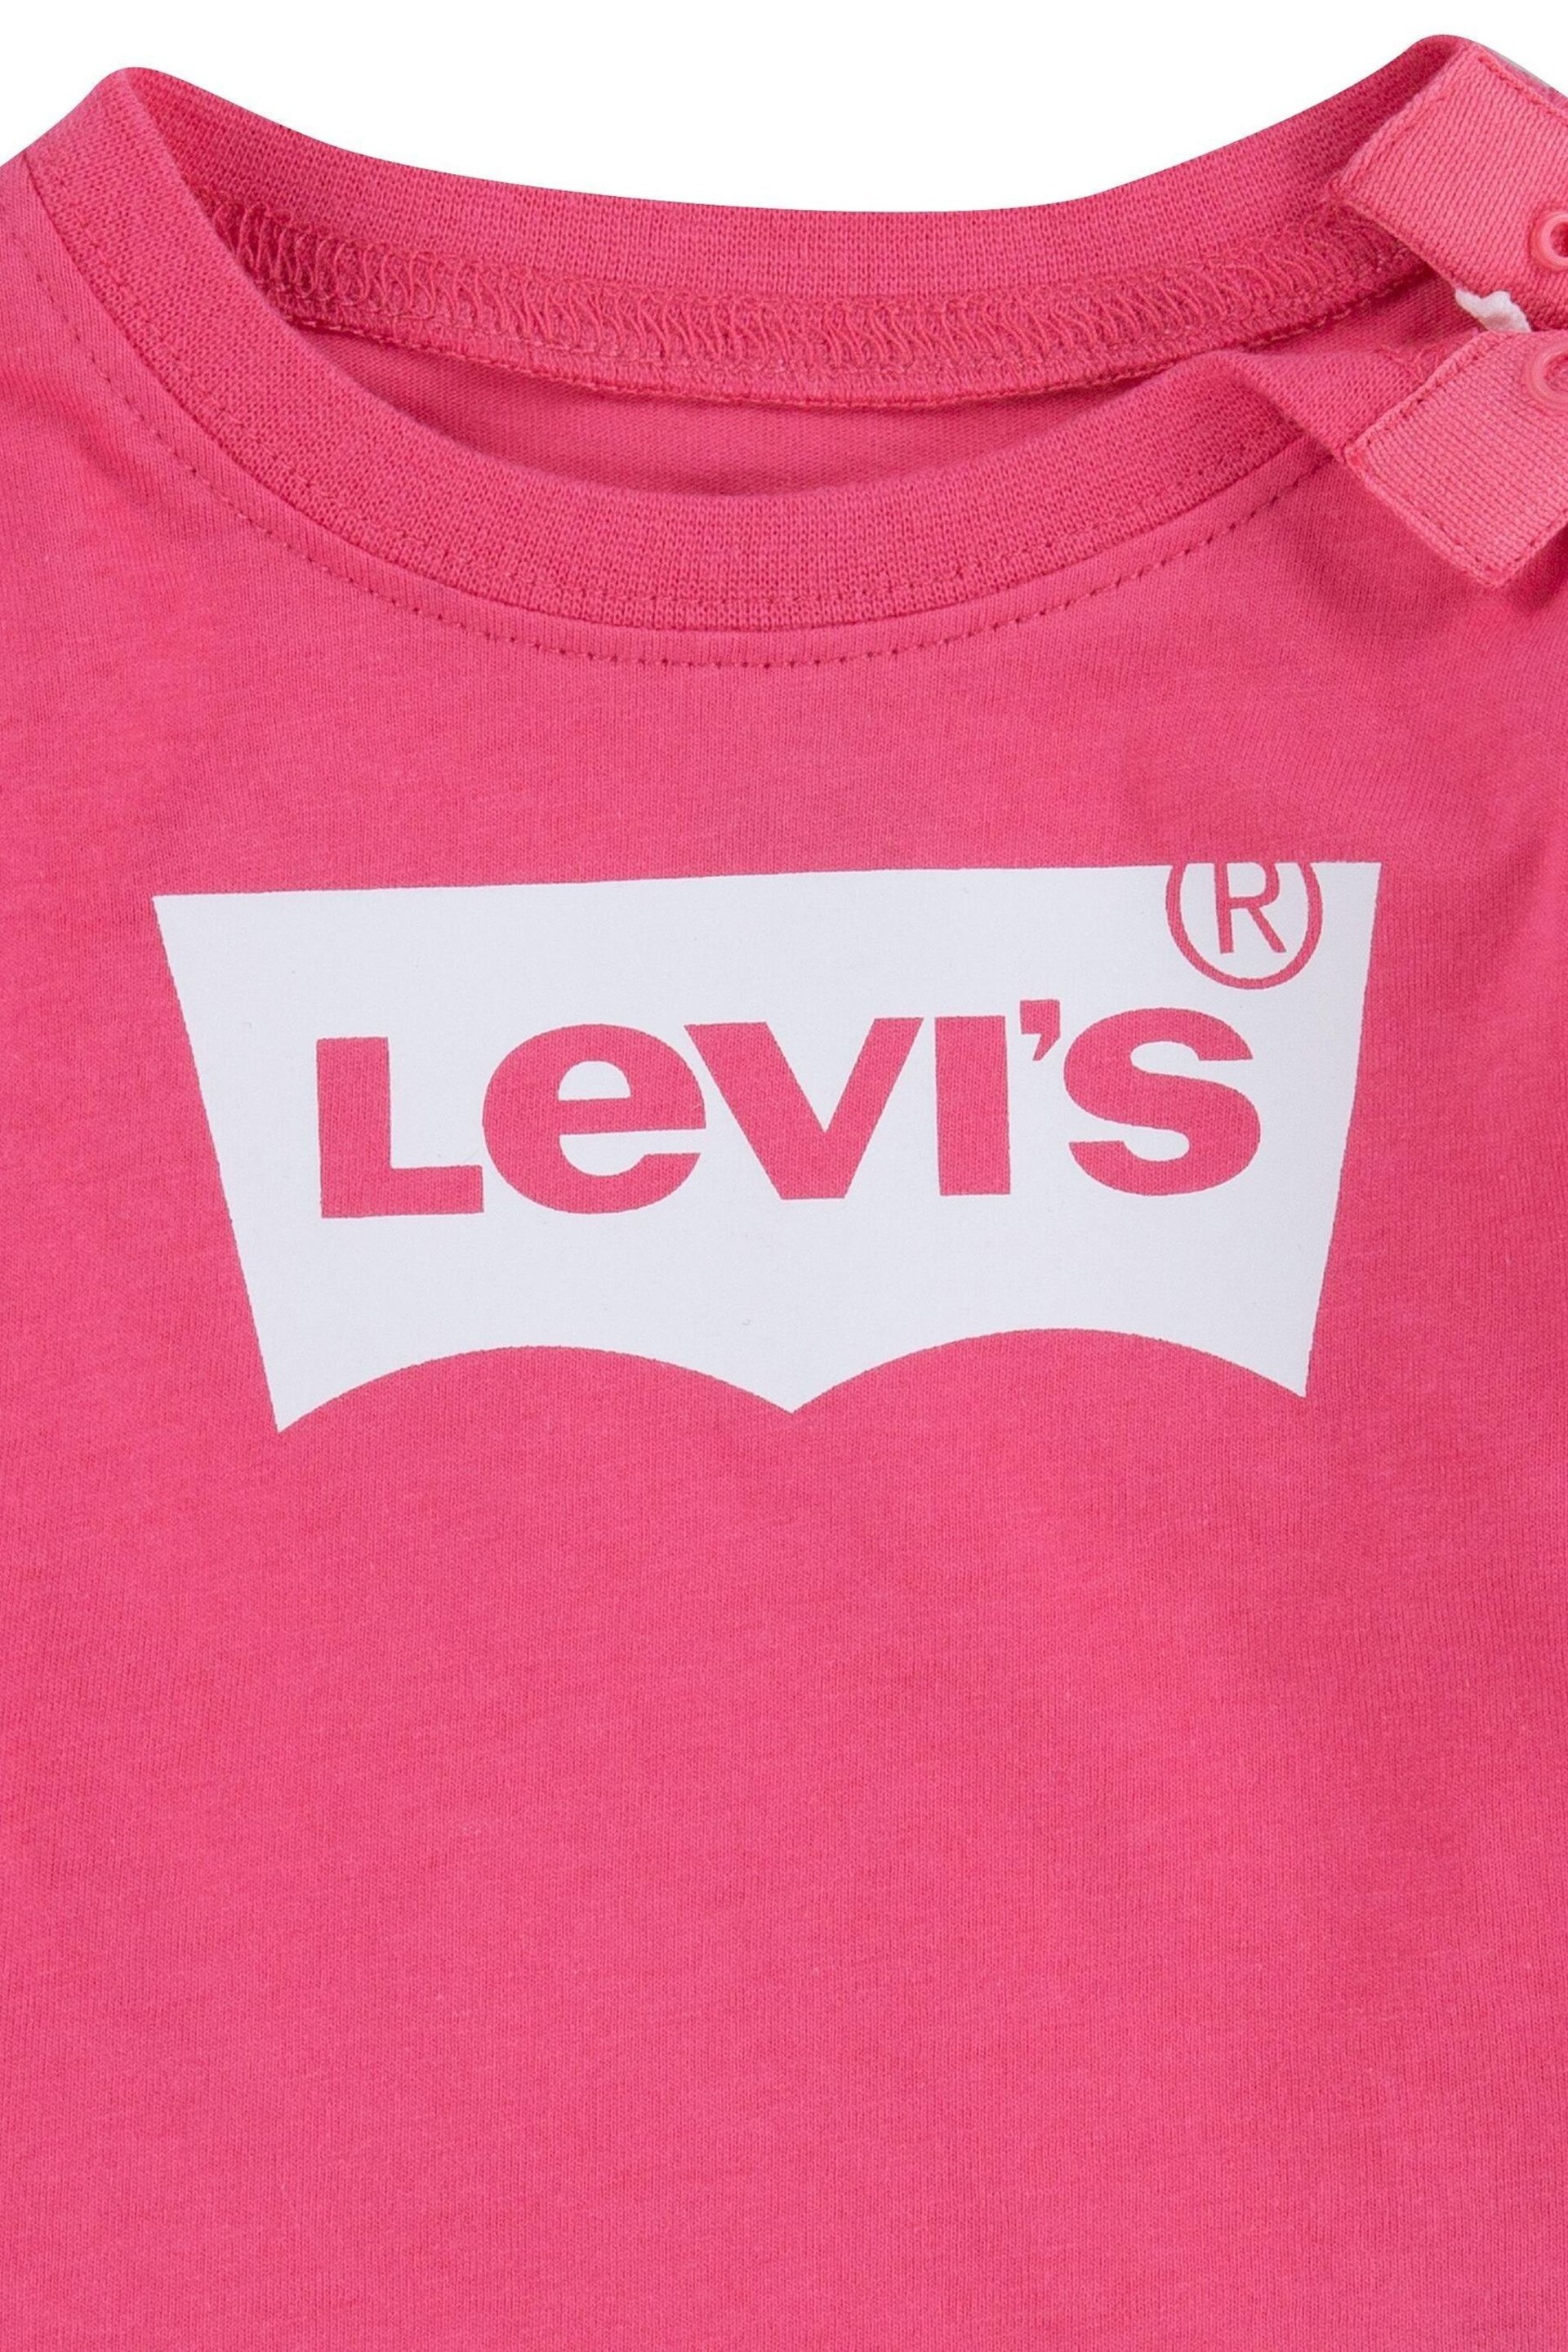 Levi's® Pink Long Sleeeve Batwing T-Shirt - Image 4 of 4